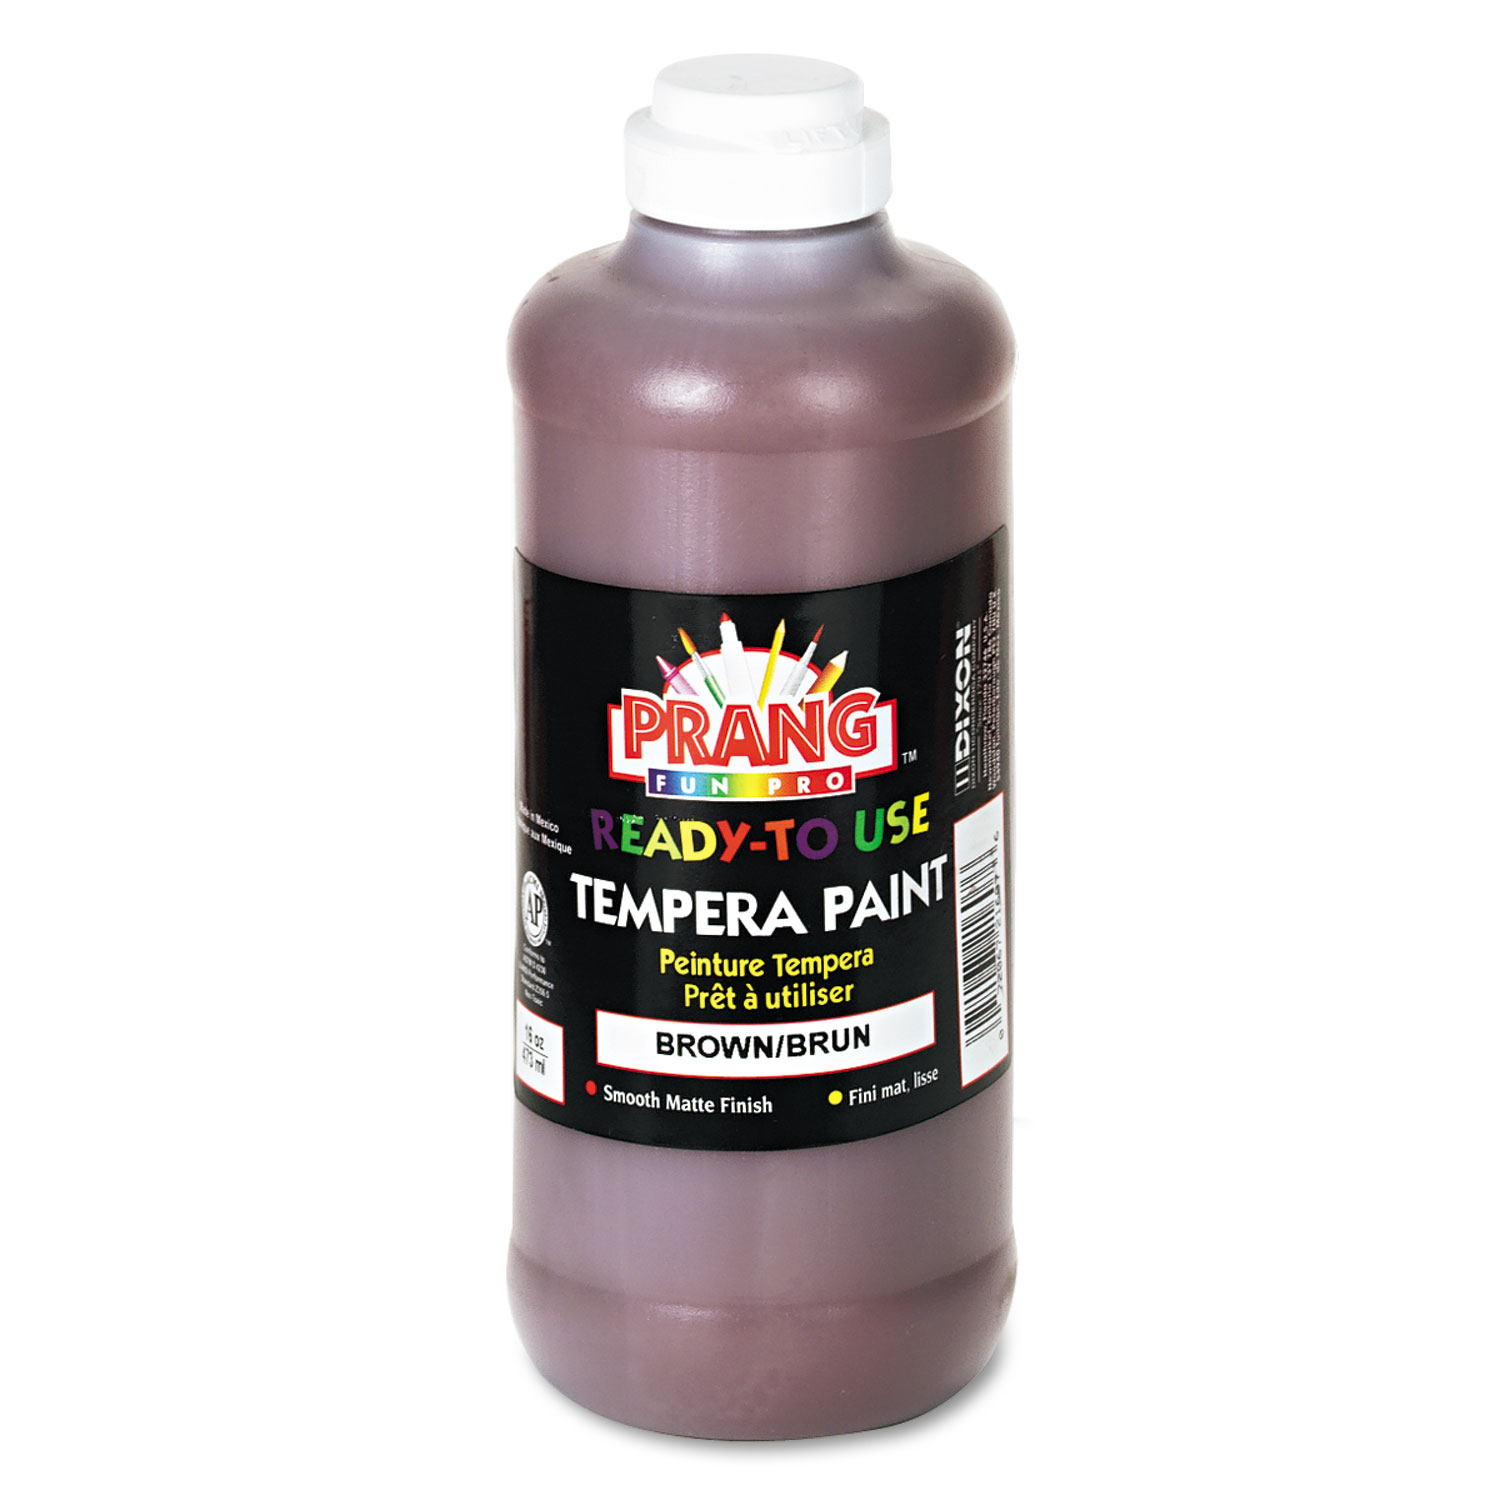 Ready-to-Use Tempera Paint, Brown, 16 oz